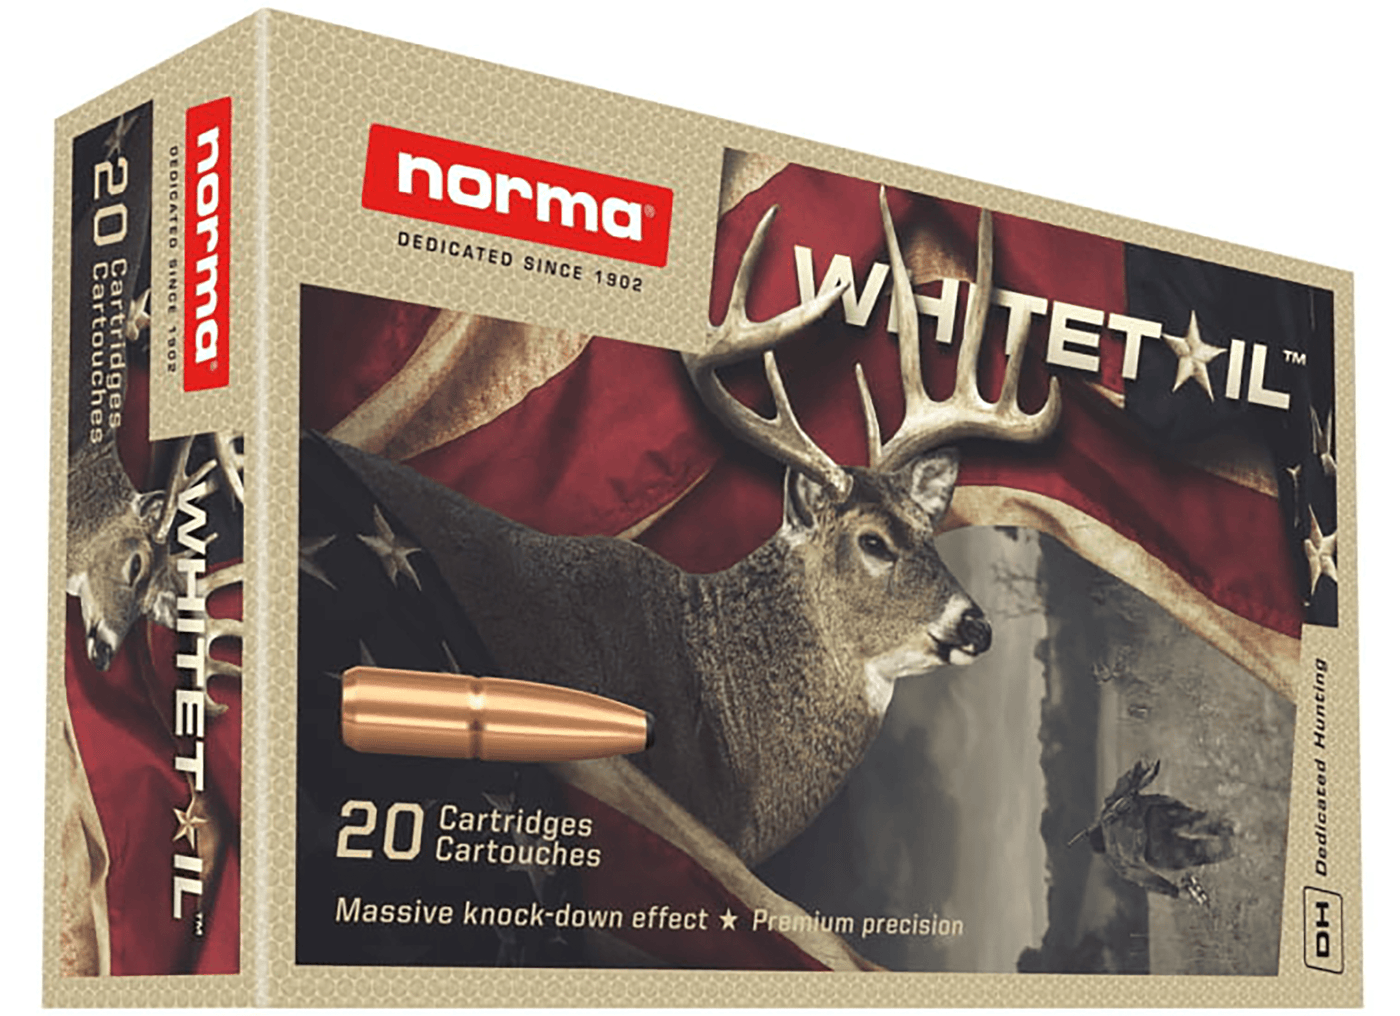 NORMA AMMUNITION (RUAG) Norma Ammunition (ruag) Whitetail, Norma 20166492 6.5 Cm 140gr Psp Whitetail    20/10 Ammo